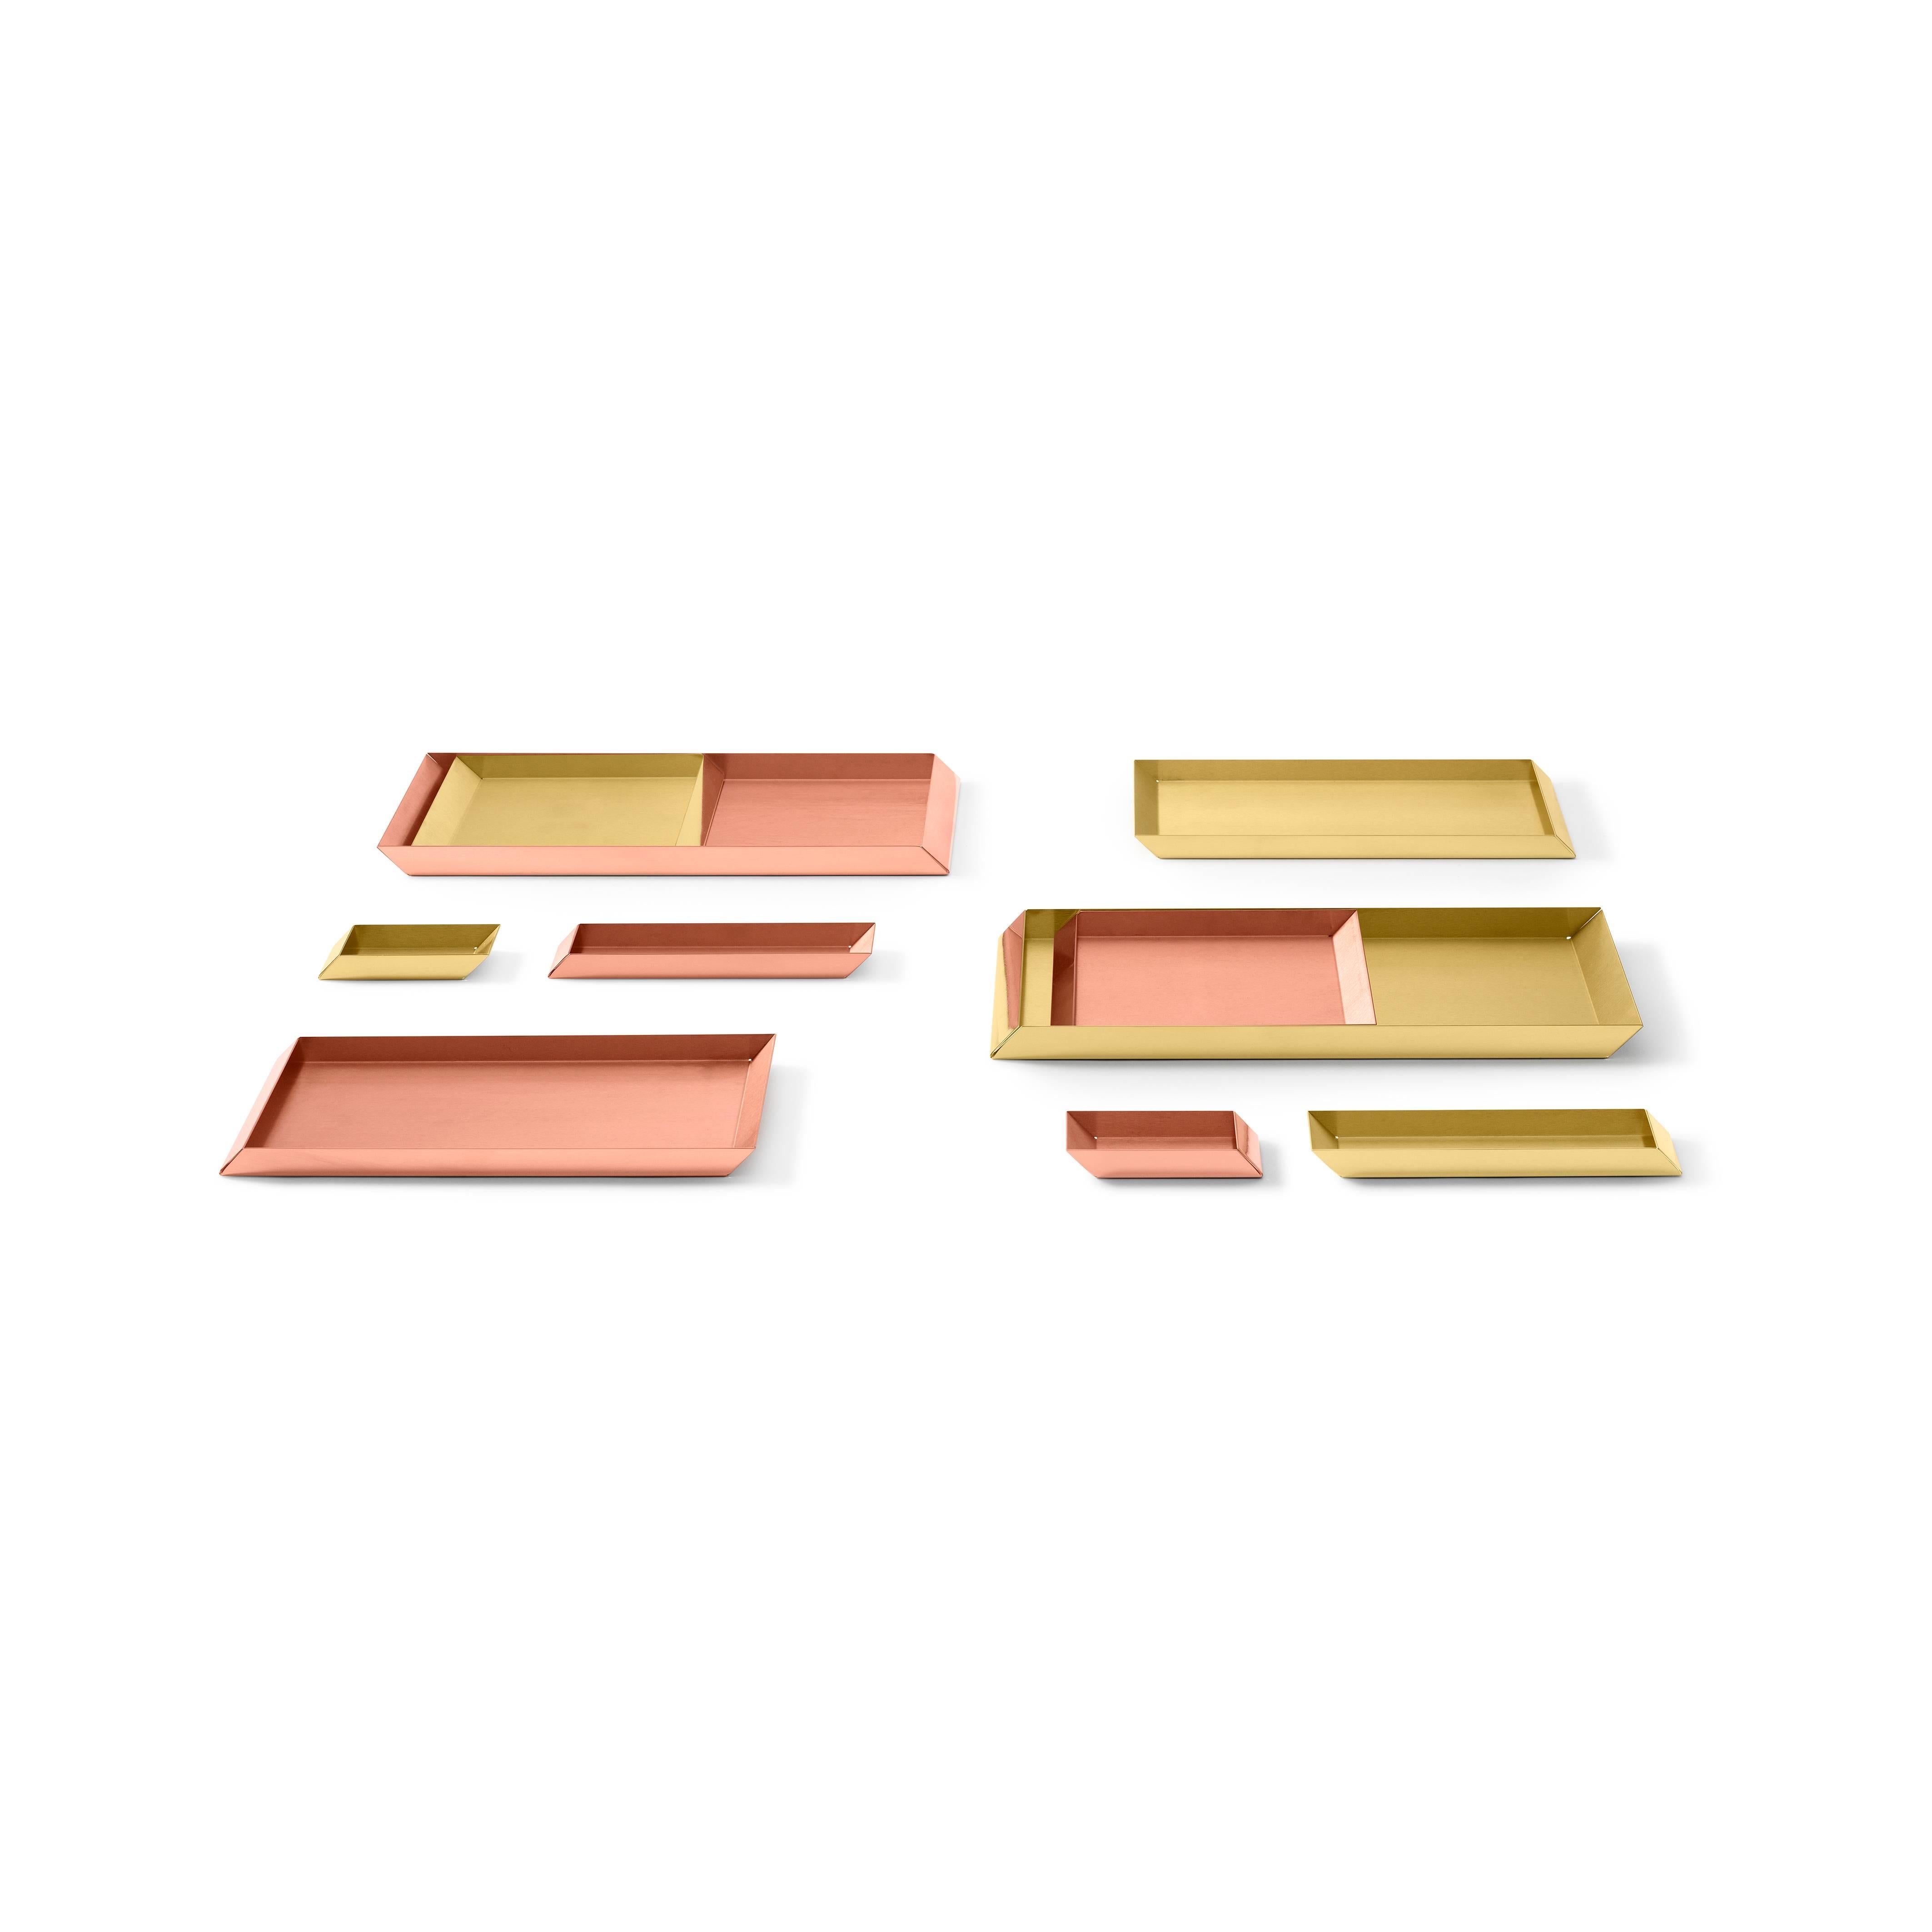 Trays in polished brass. The compositional scheme of this family of small trays is the axonometric isometric projection of two parallelepipeds which creates a three-dimensional optical effect implemented by inclined edges and by contrasting metal